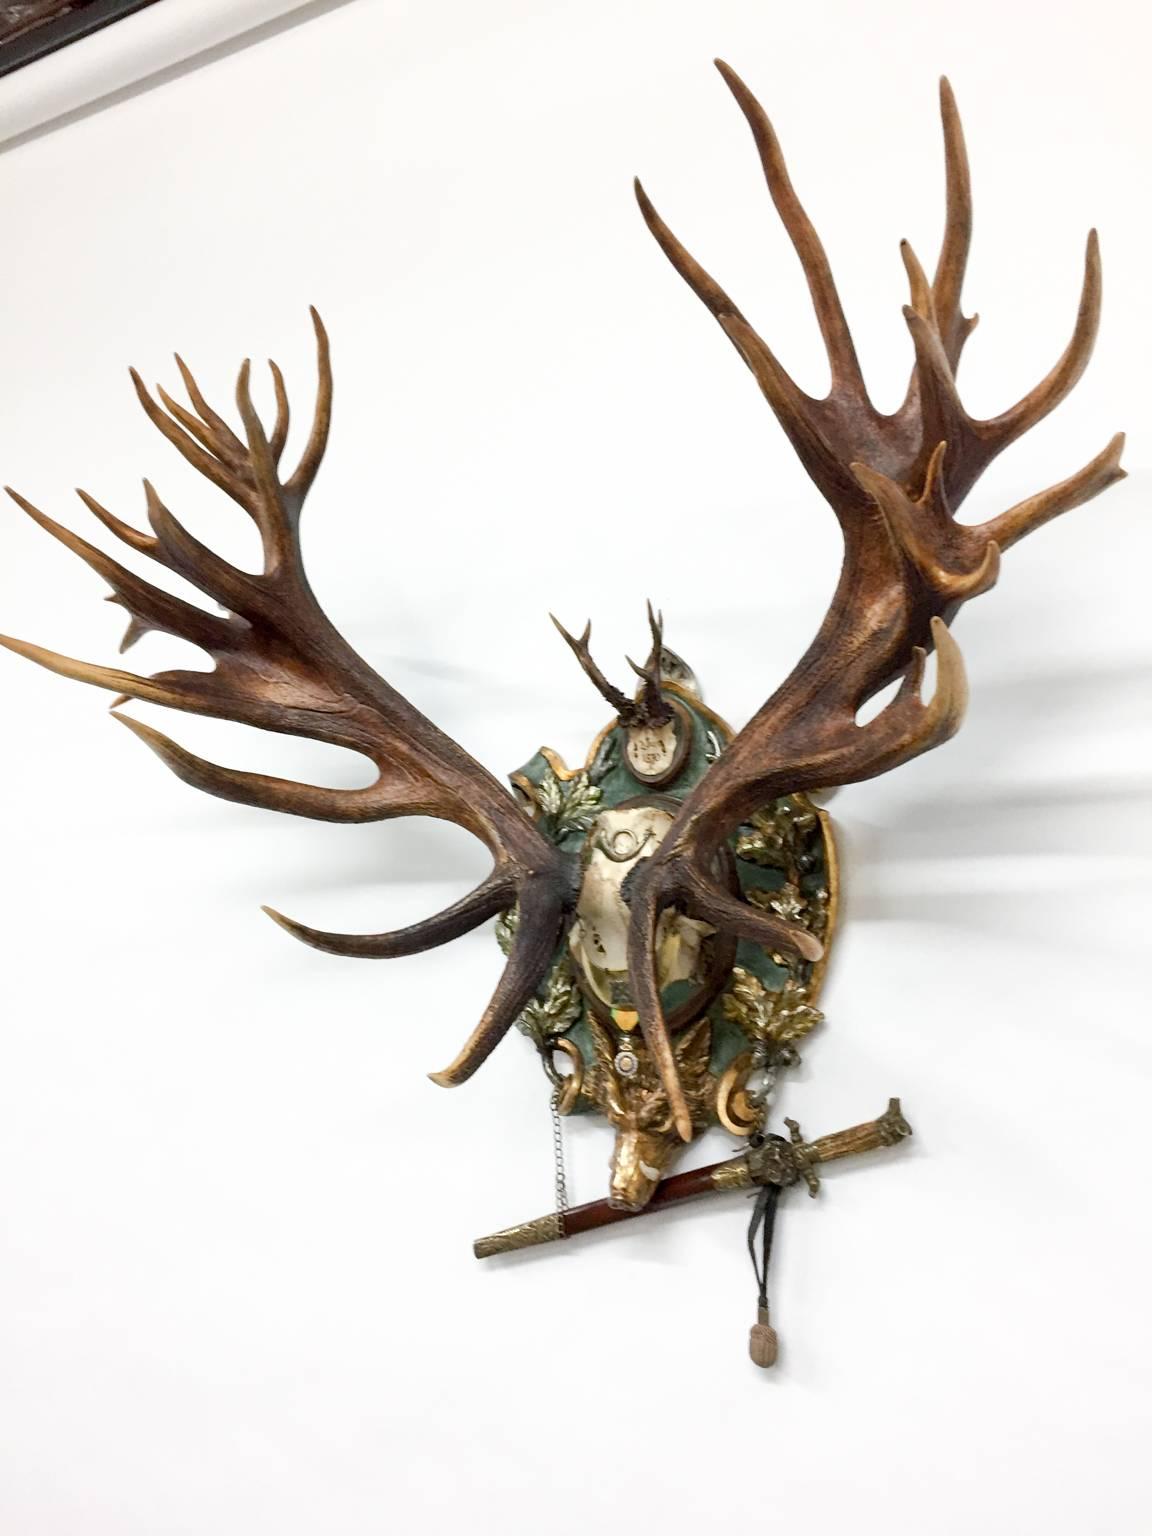 19th century Habsburg Red Stag and Roe Deer hunt trophy on polychromed and gilt hand-carved period replacement plaque that once hung in Emperor Franz Joseph's castle at Eckartsau in the Southern Austrian Alps. This mount sports an original 1870